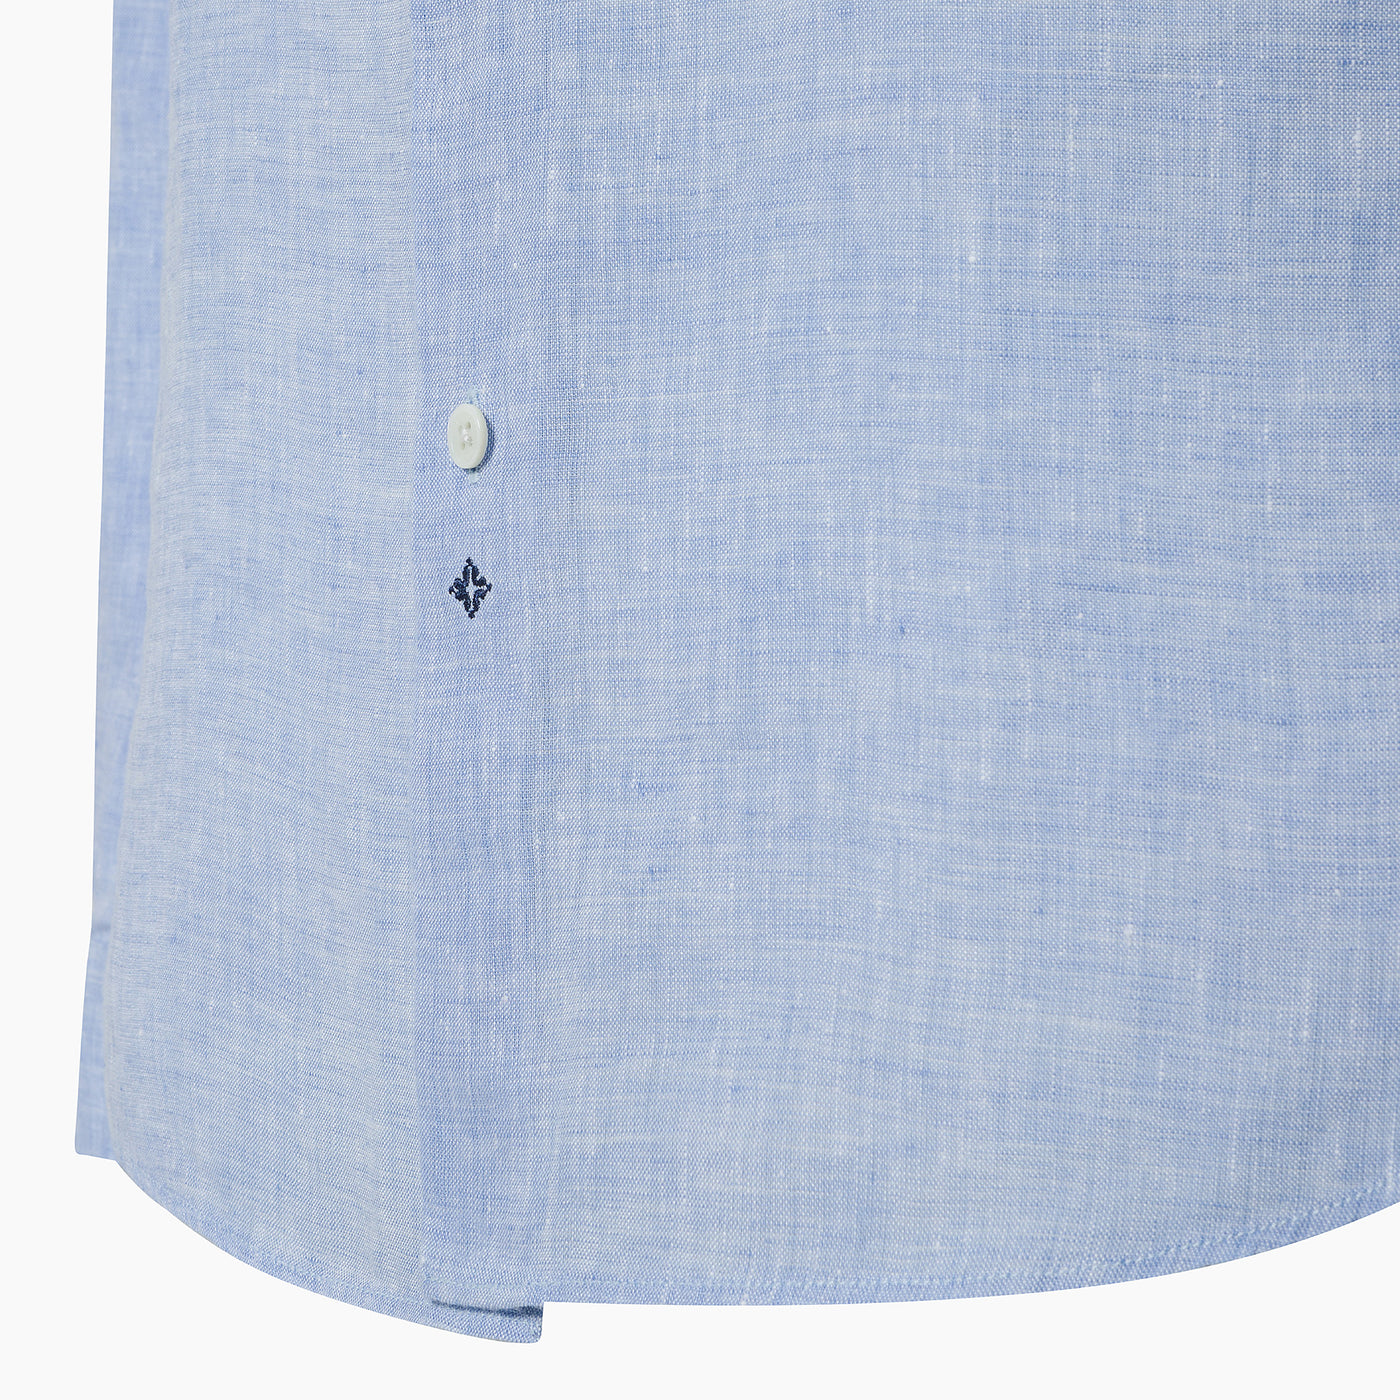 Clamenc shirt in Voile Linen